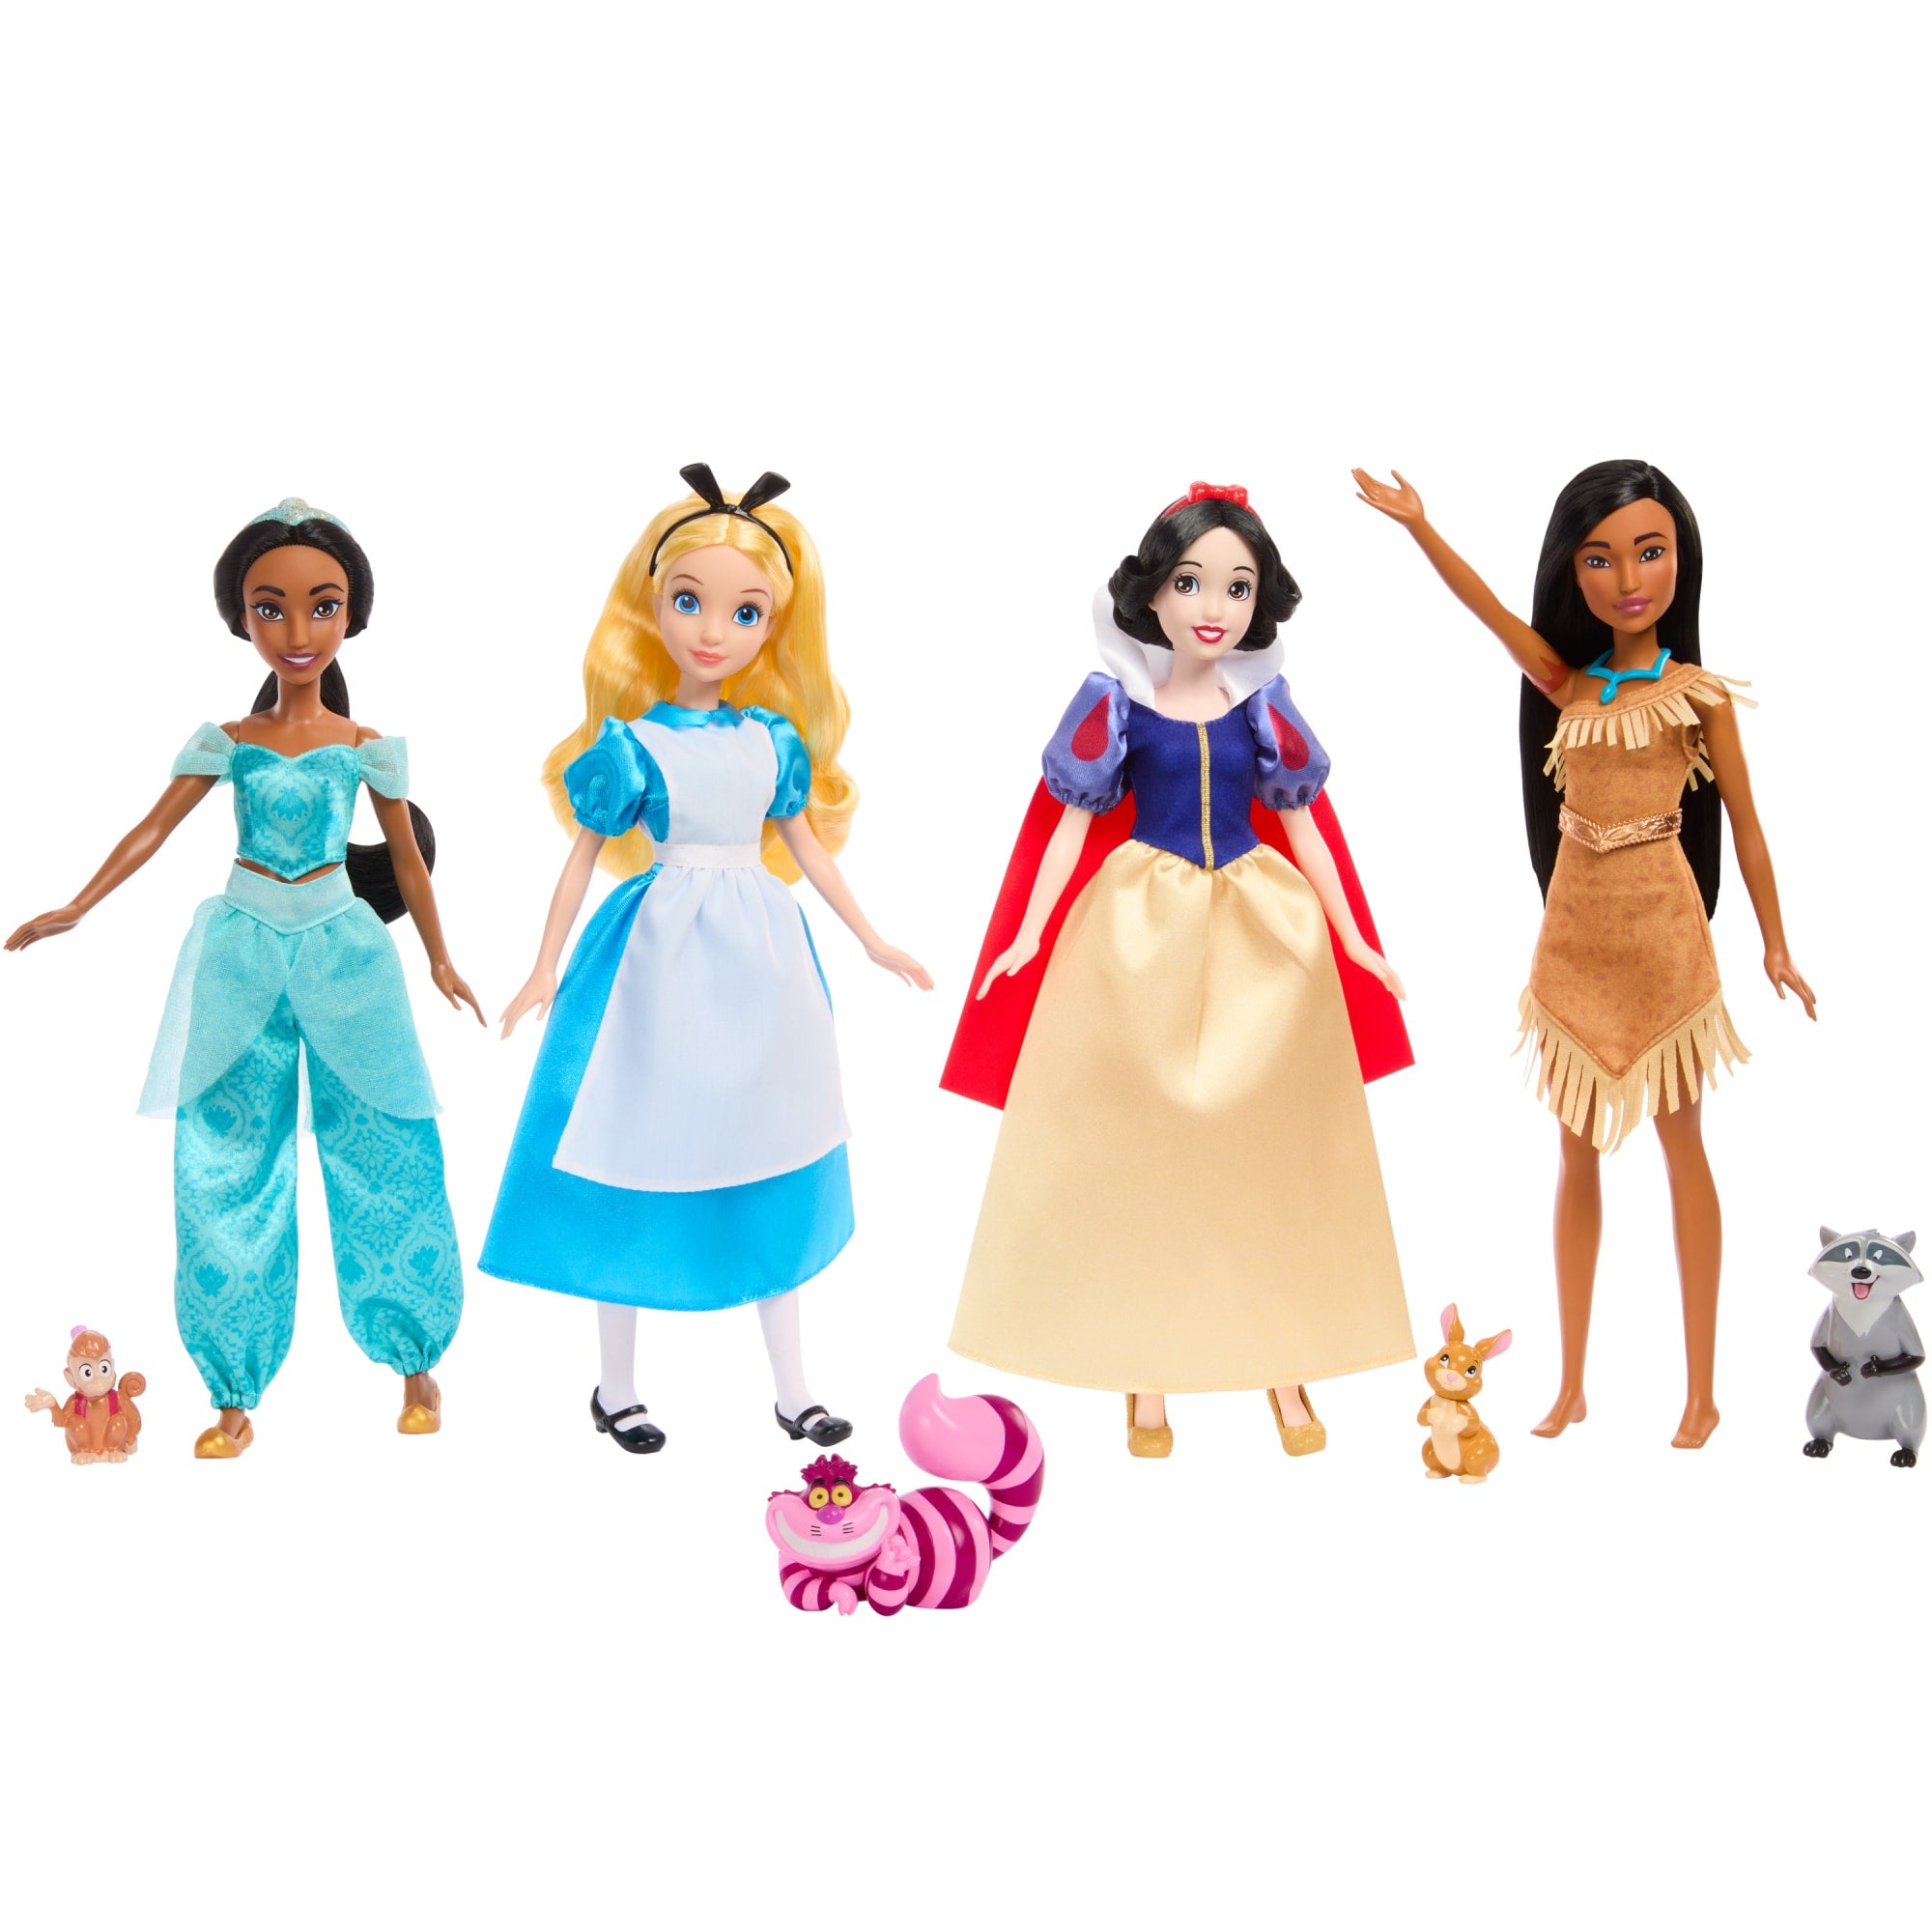 American Girl Releases Three Disney Princess Inspired Dolls For